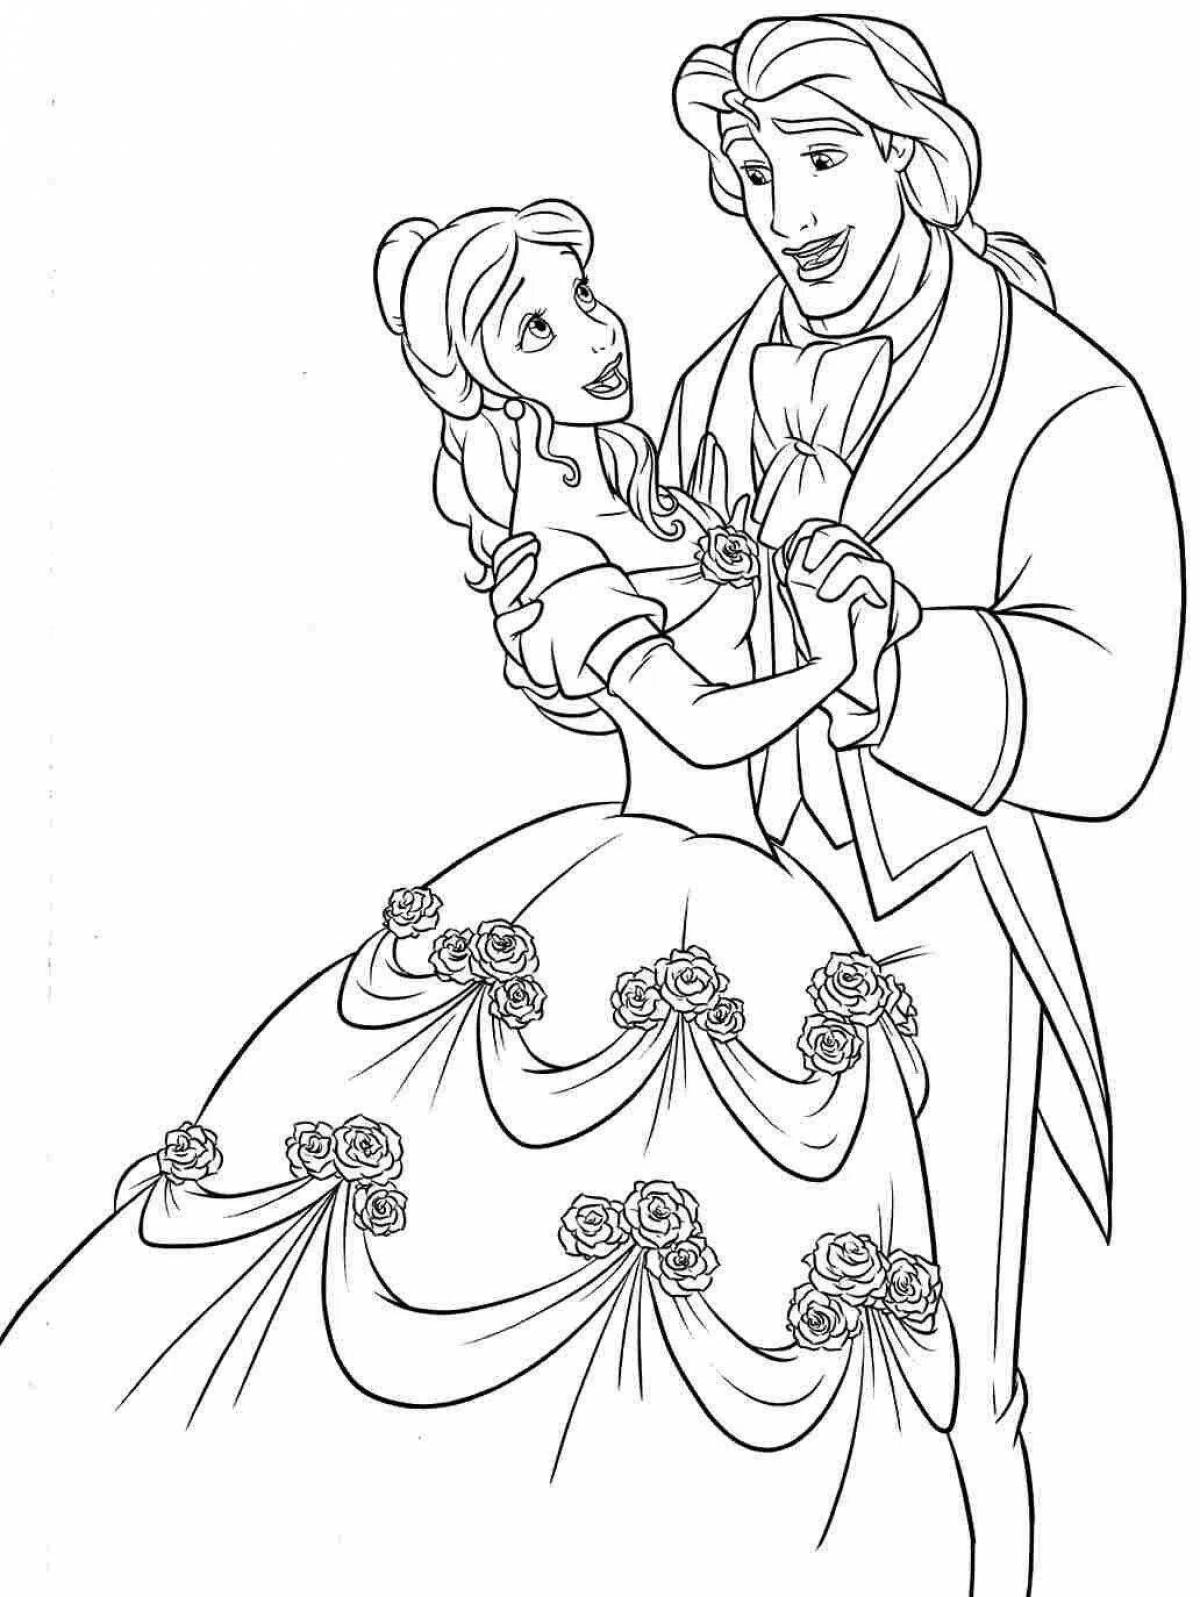 Playful beauty and the beast coloring pages for kids